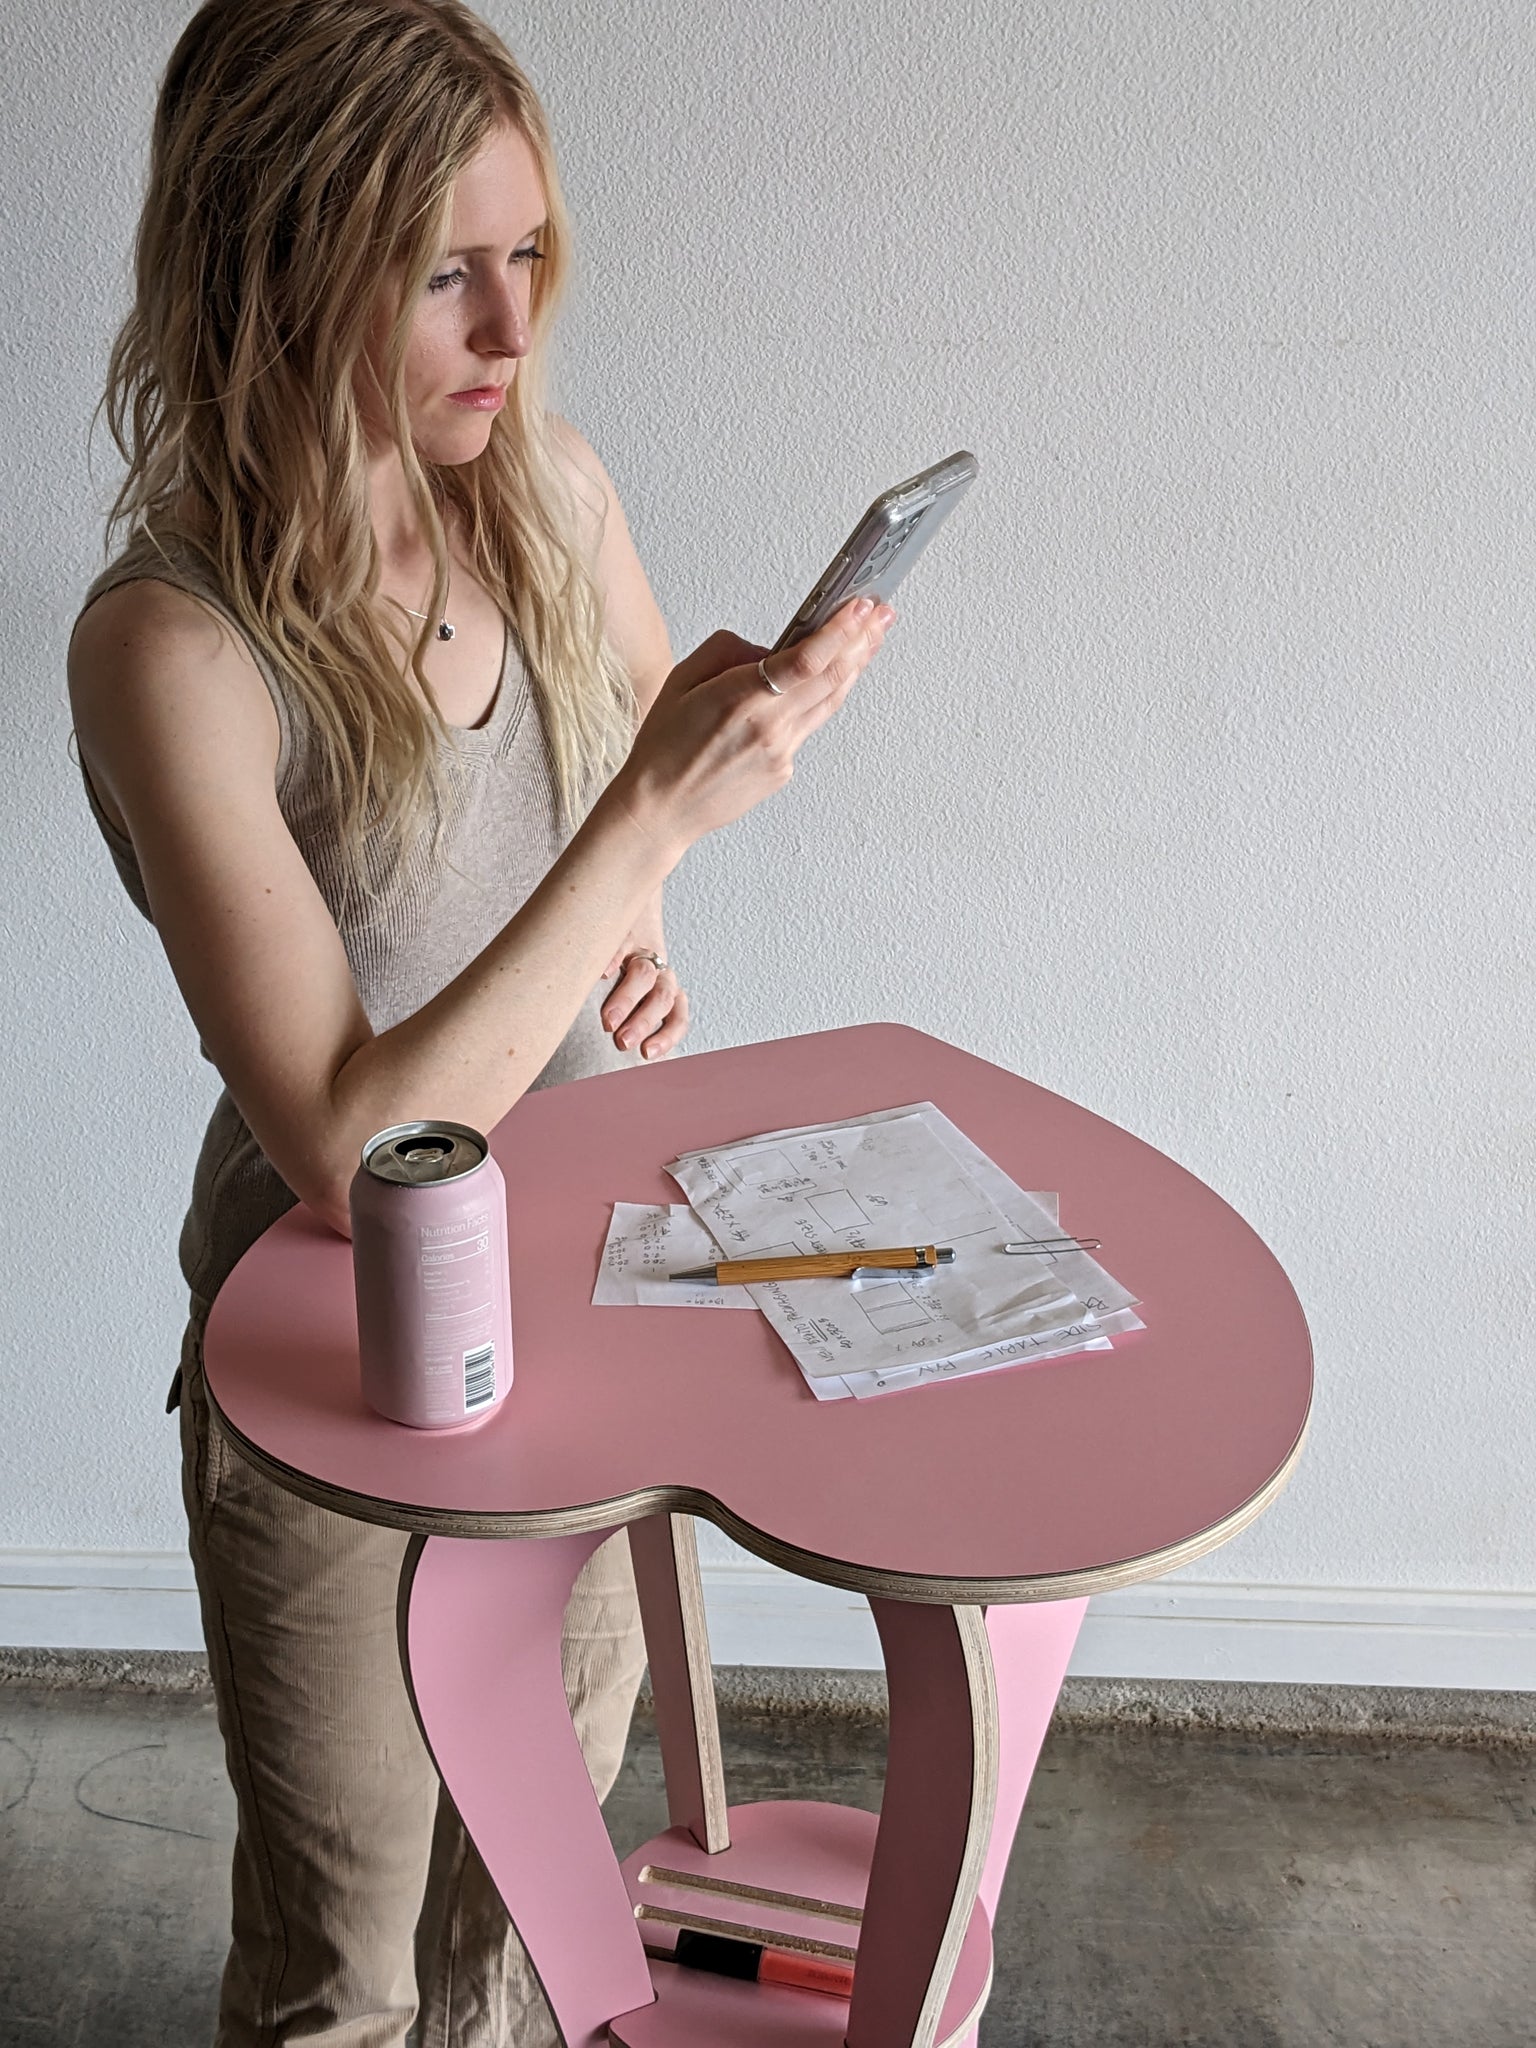 Lilly Updesk w/Heart